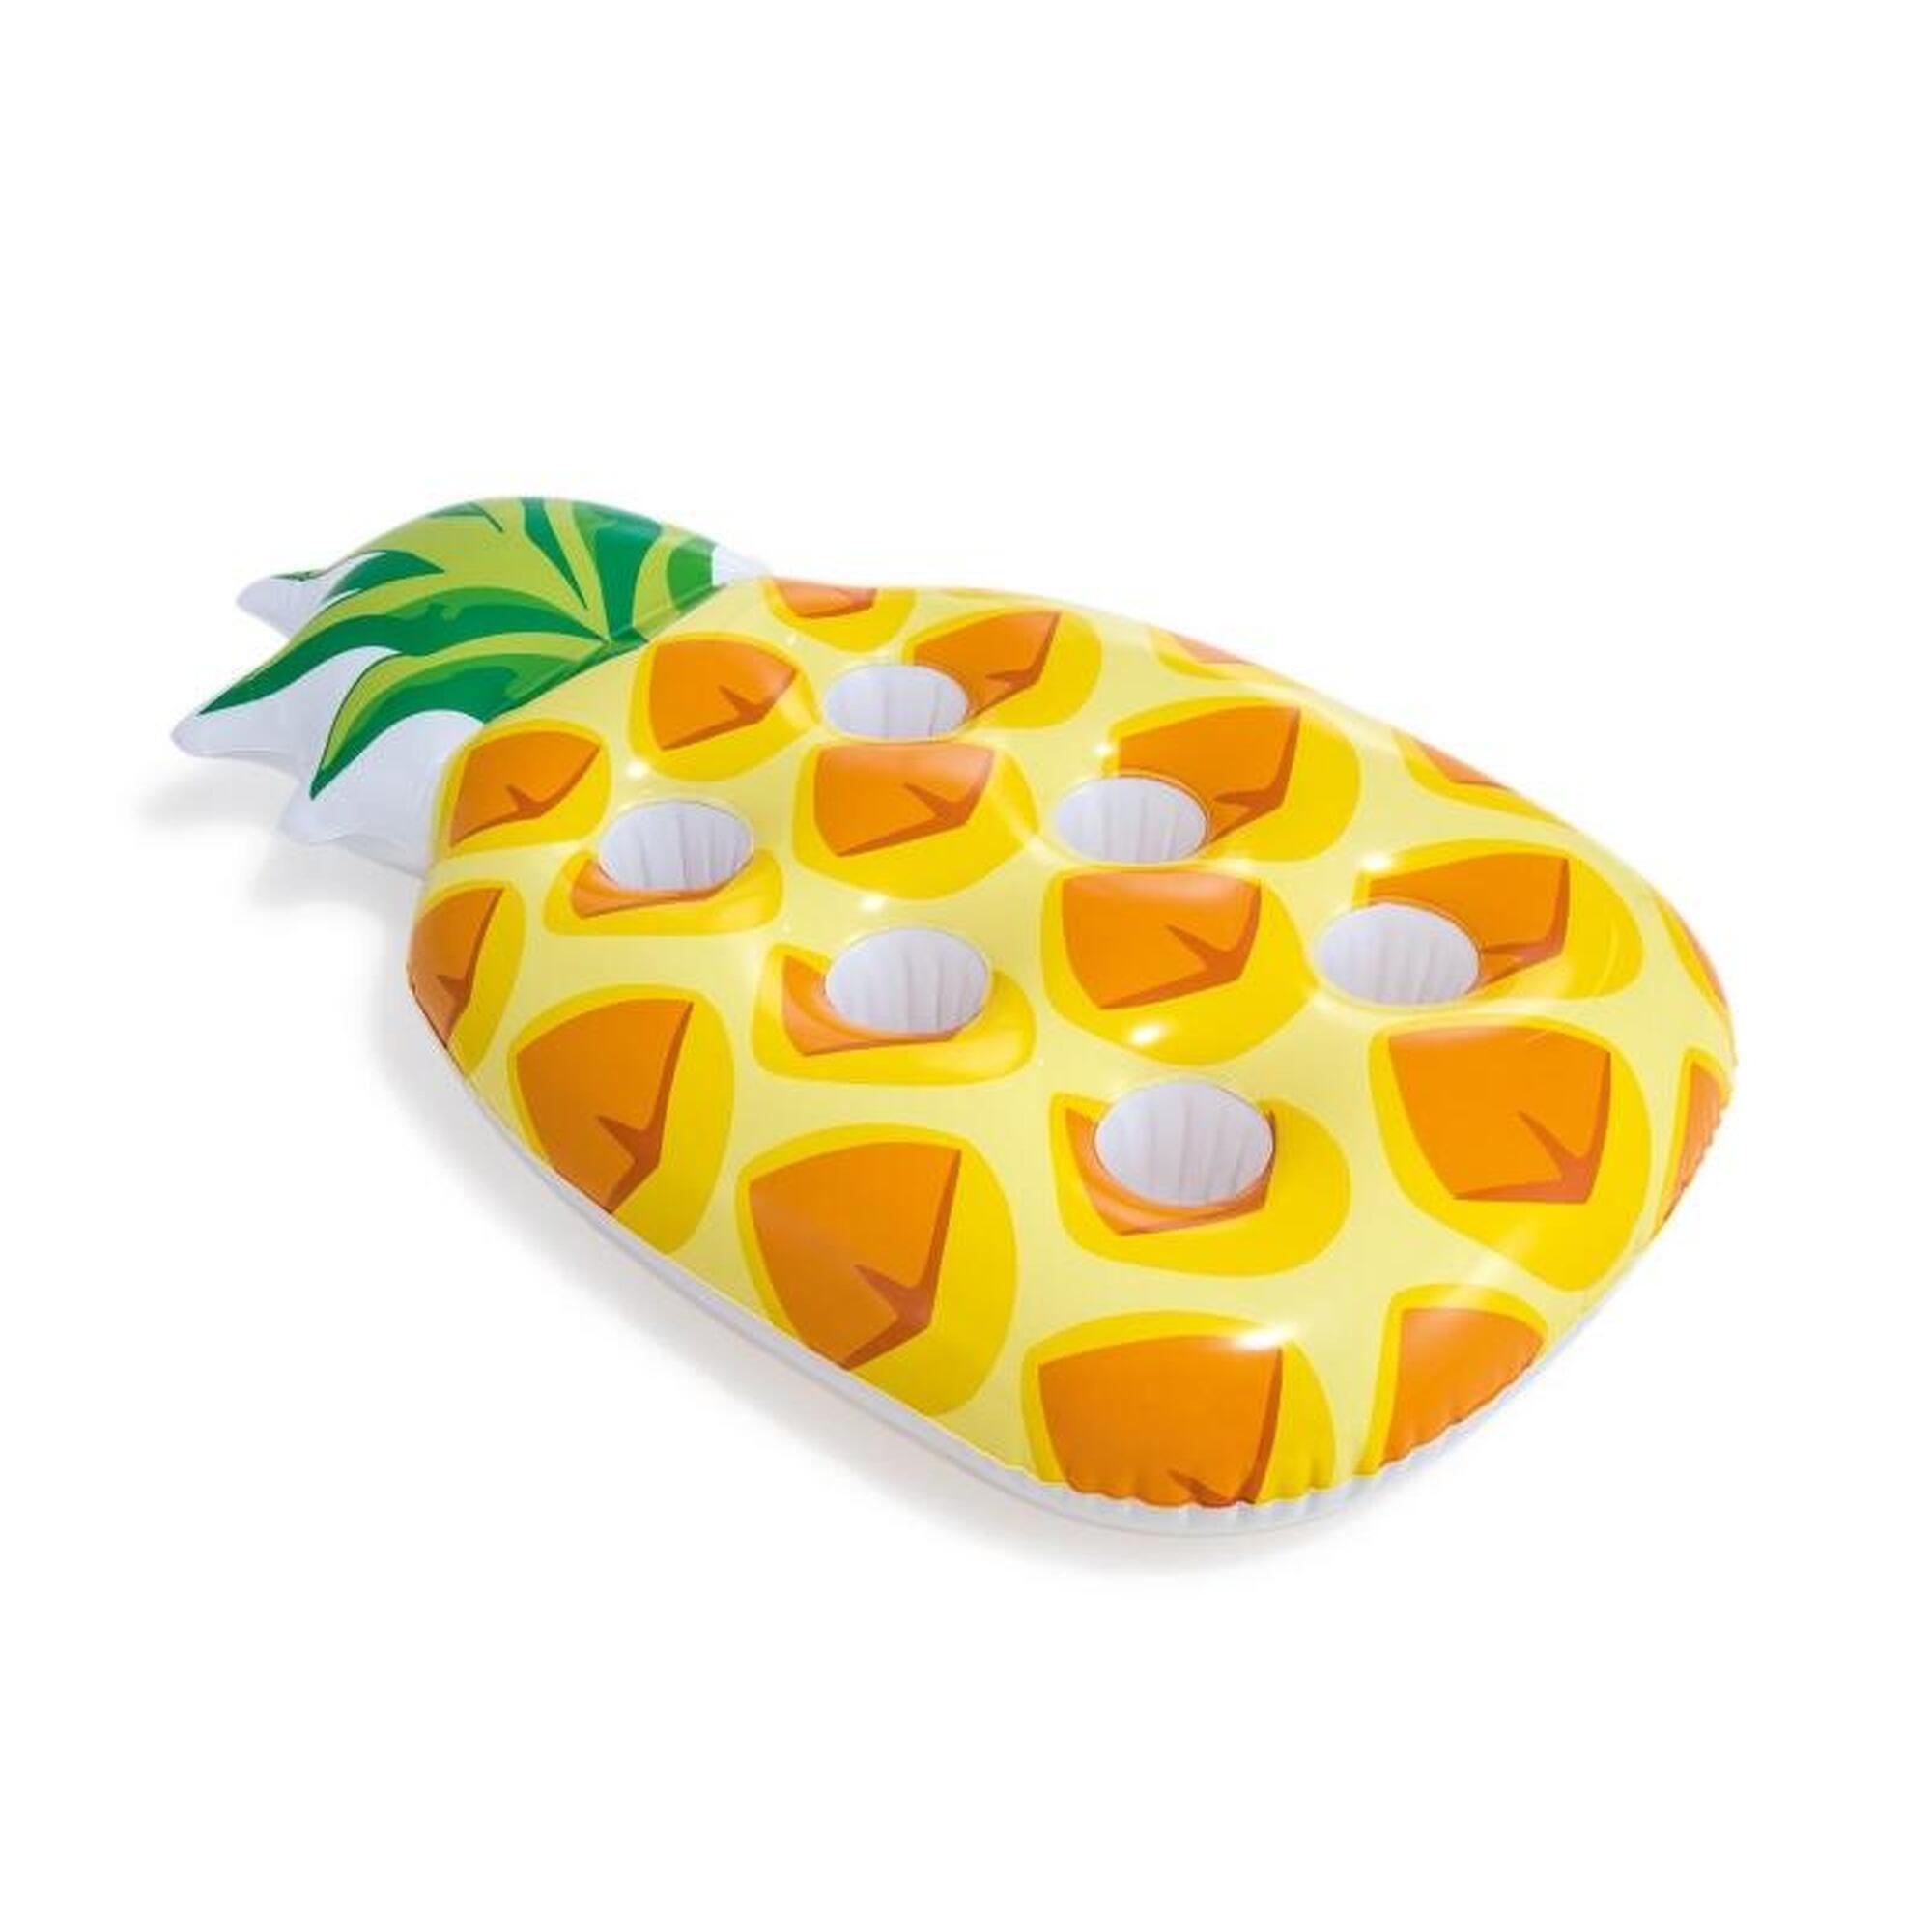 IN57505 Pineapple Drink Holder (Can hold up to 6 drinks)